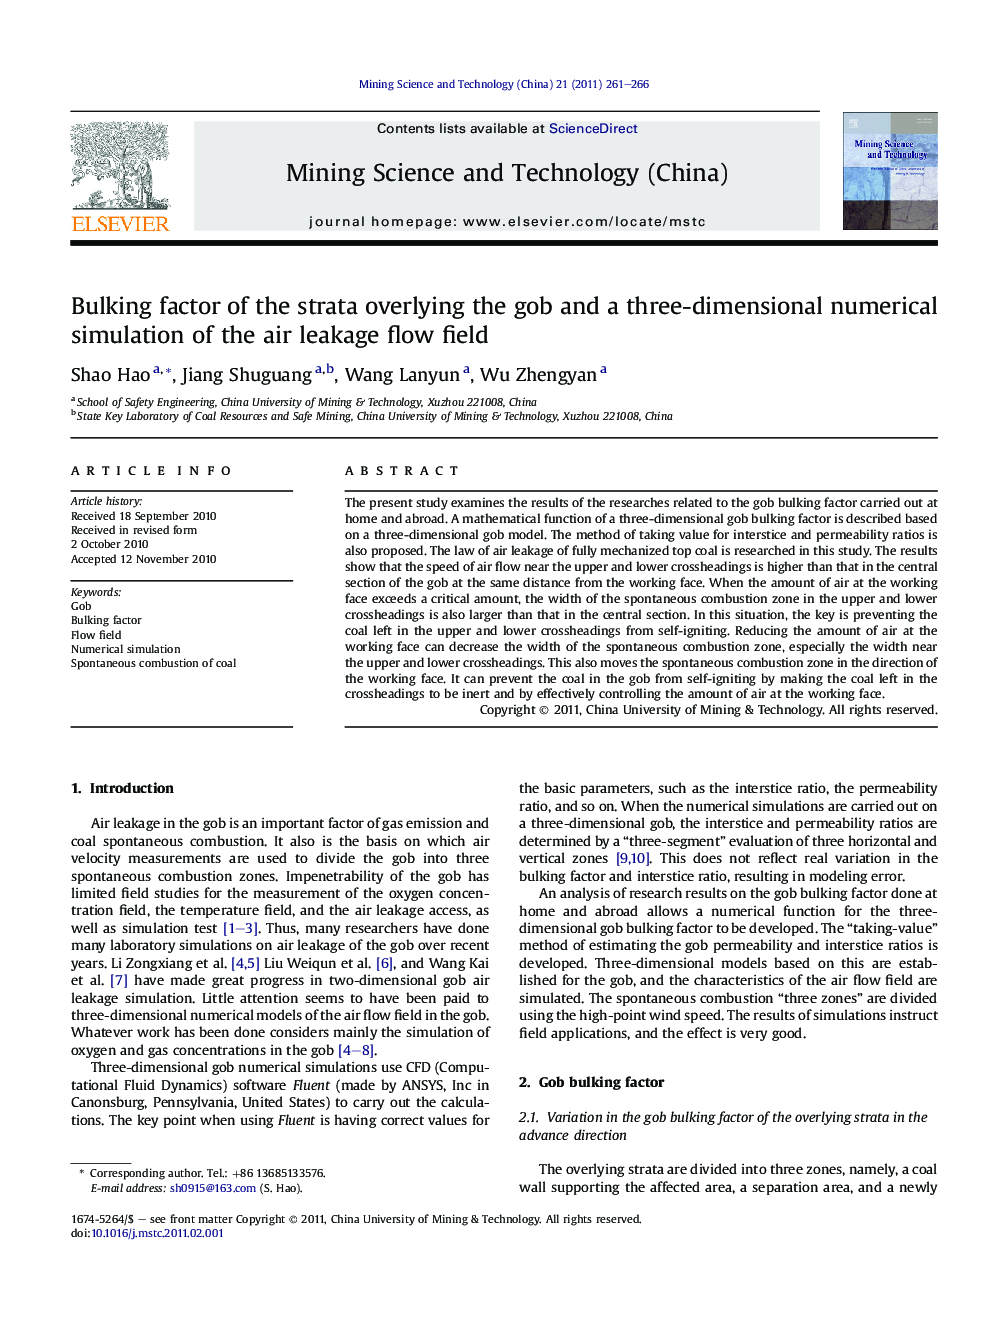 Bulking factor of the strata overlying the gob and a three-dimensional numerical simulation of the air leakage flow field